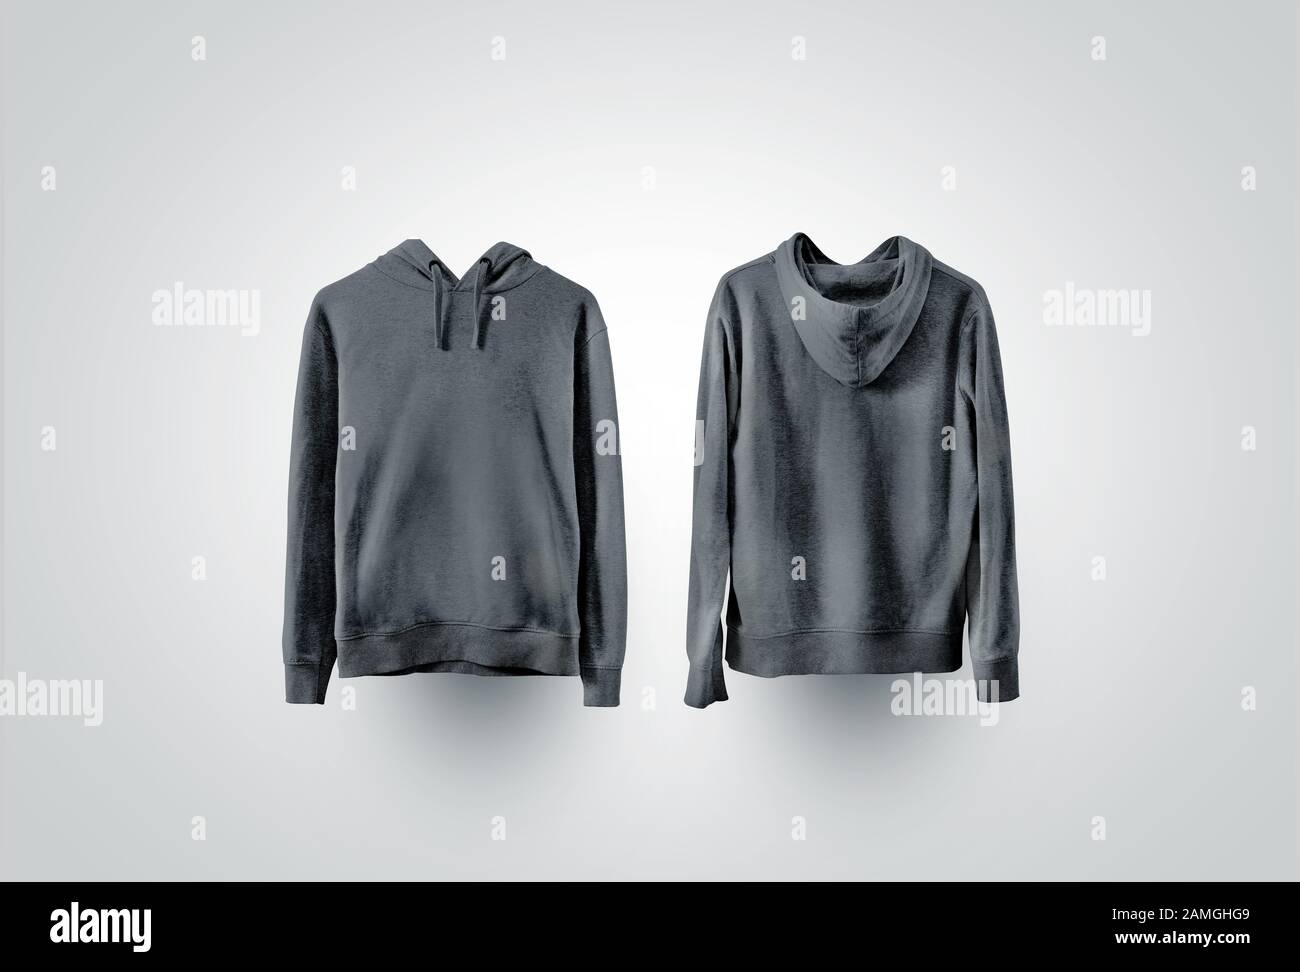 Download Blank Black Sweatshirt Mockup Front And Back View Stock Photo Alamy